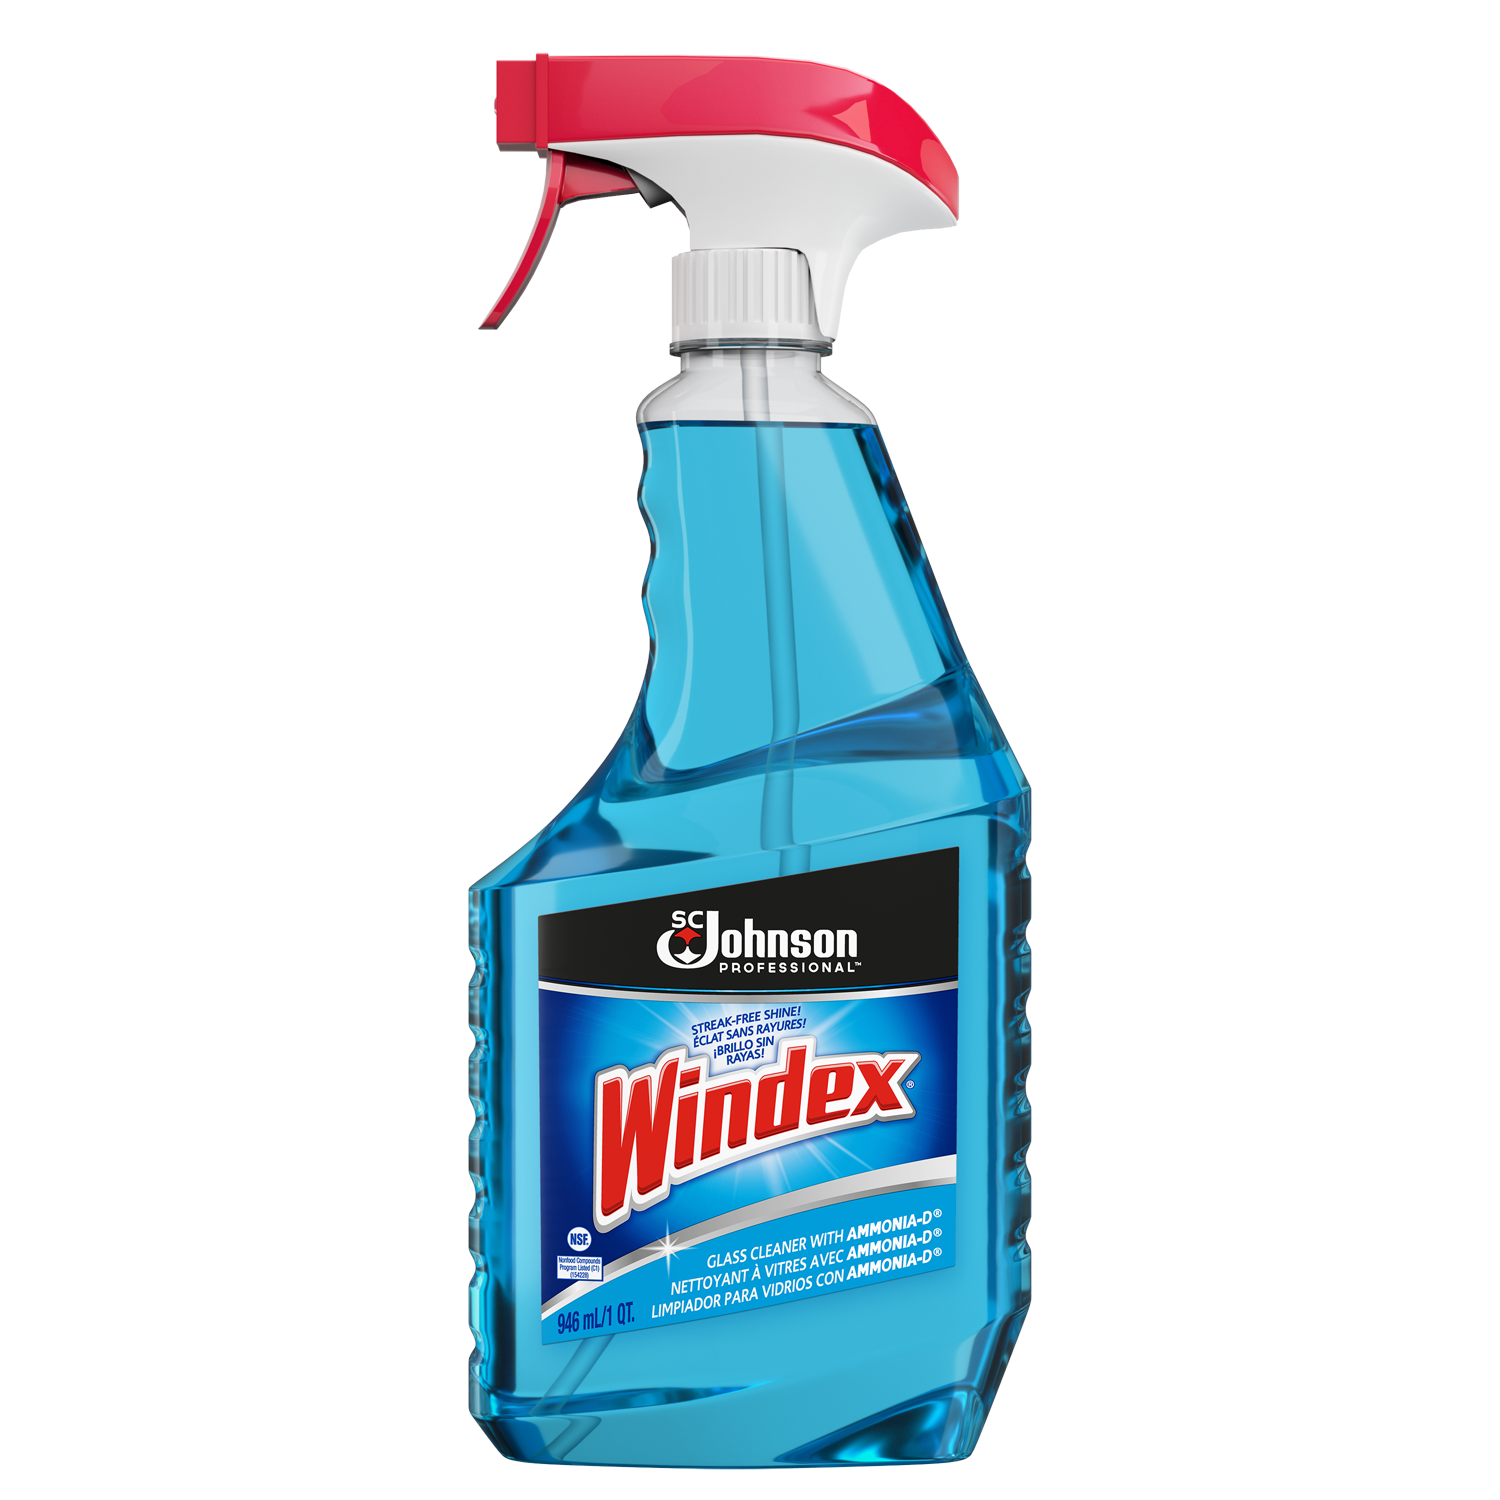 Windex® Powerized Glass Cleaners with AmmoniaD® SC Johnson Professional™